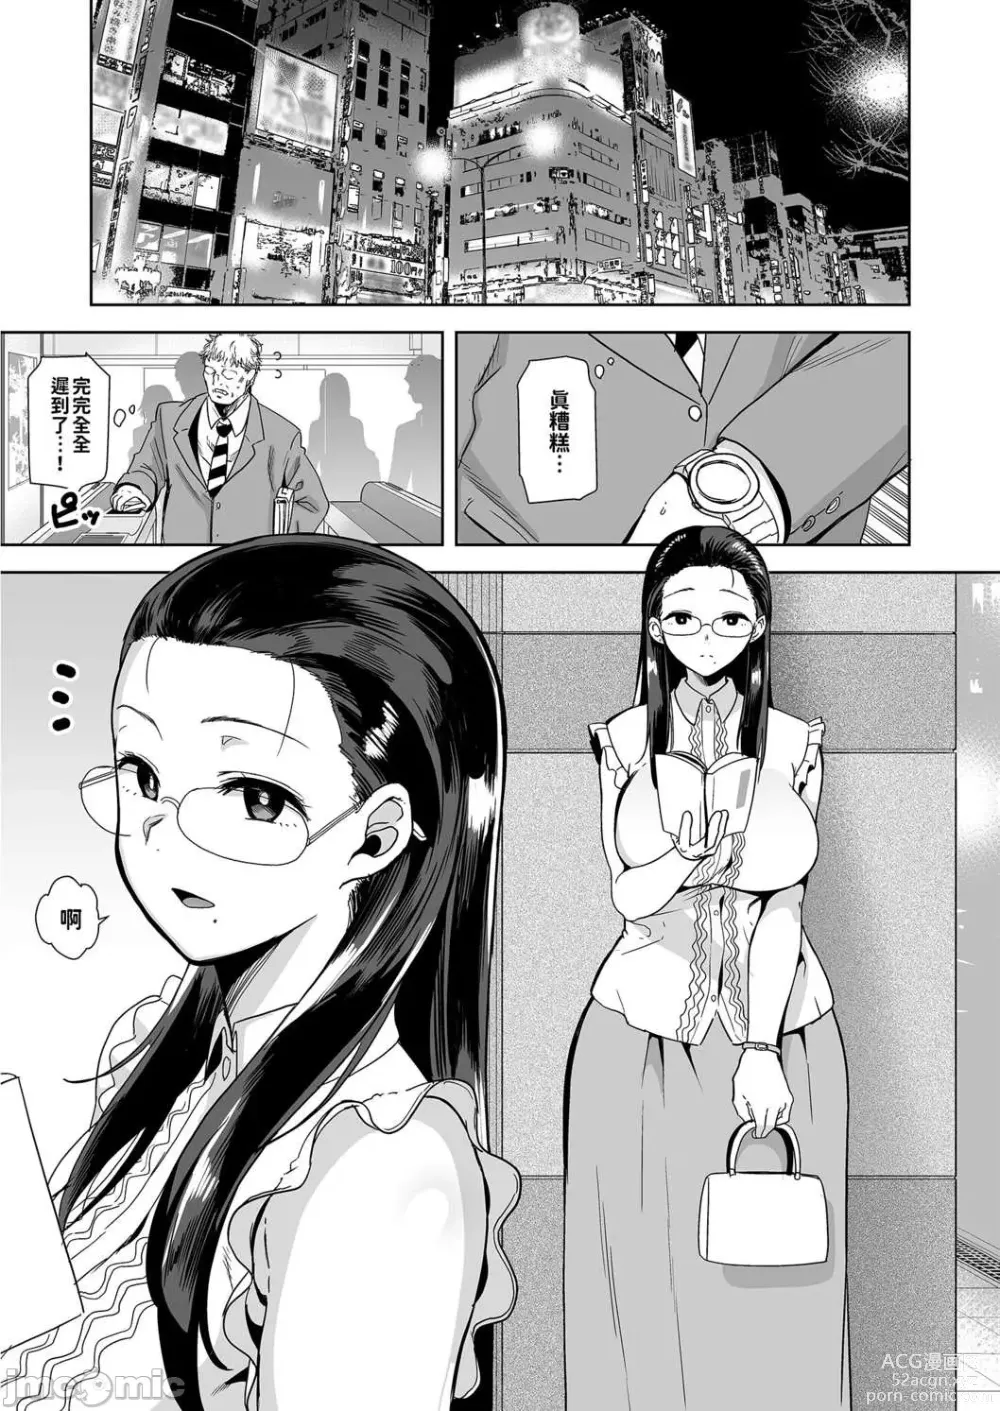 Page 3 of doujinshi 聖華女学院高等部公認竿おじさん 1